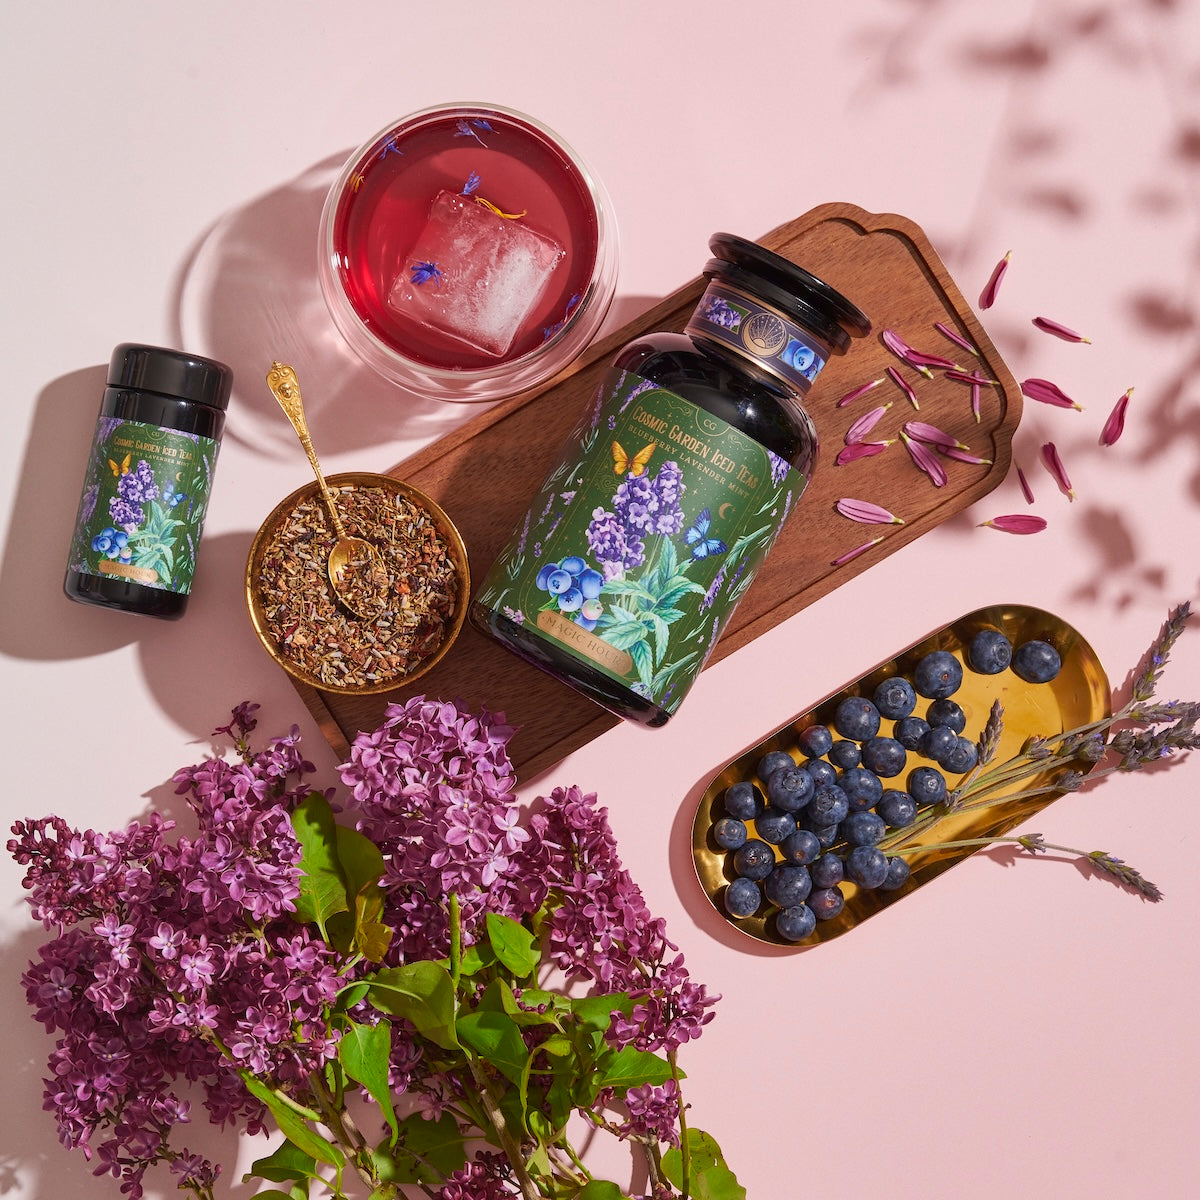 A vibrant arrangement featuring a large jar, a small bottle, a cup of Blueberry Lavender Mint: Cosmic Garden Iced Tea by Magic Hour with an ice cube, a bowl of loose leaf tea with a gold spoon, a bunch of purple flowers, and a gold tray of blueberries during the magic hour. The jars have botanical labels, and petals are scattered on a wooden board.